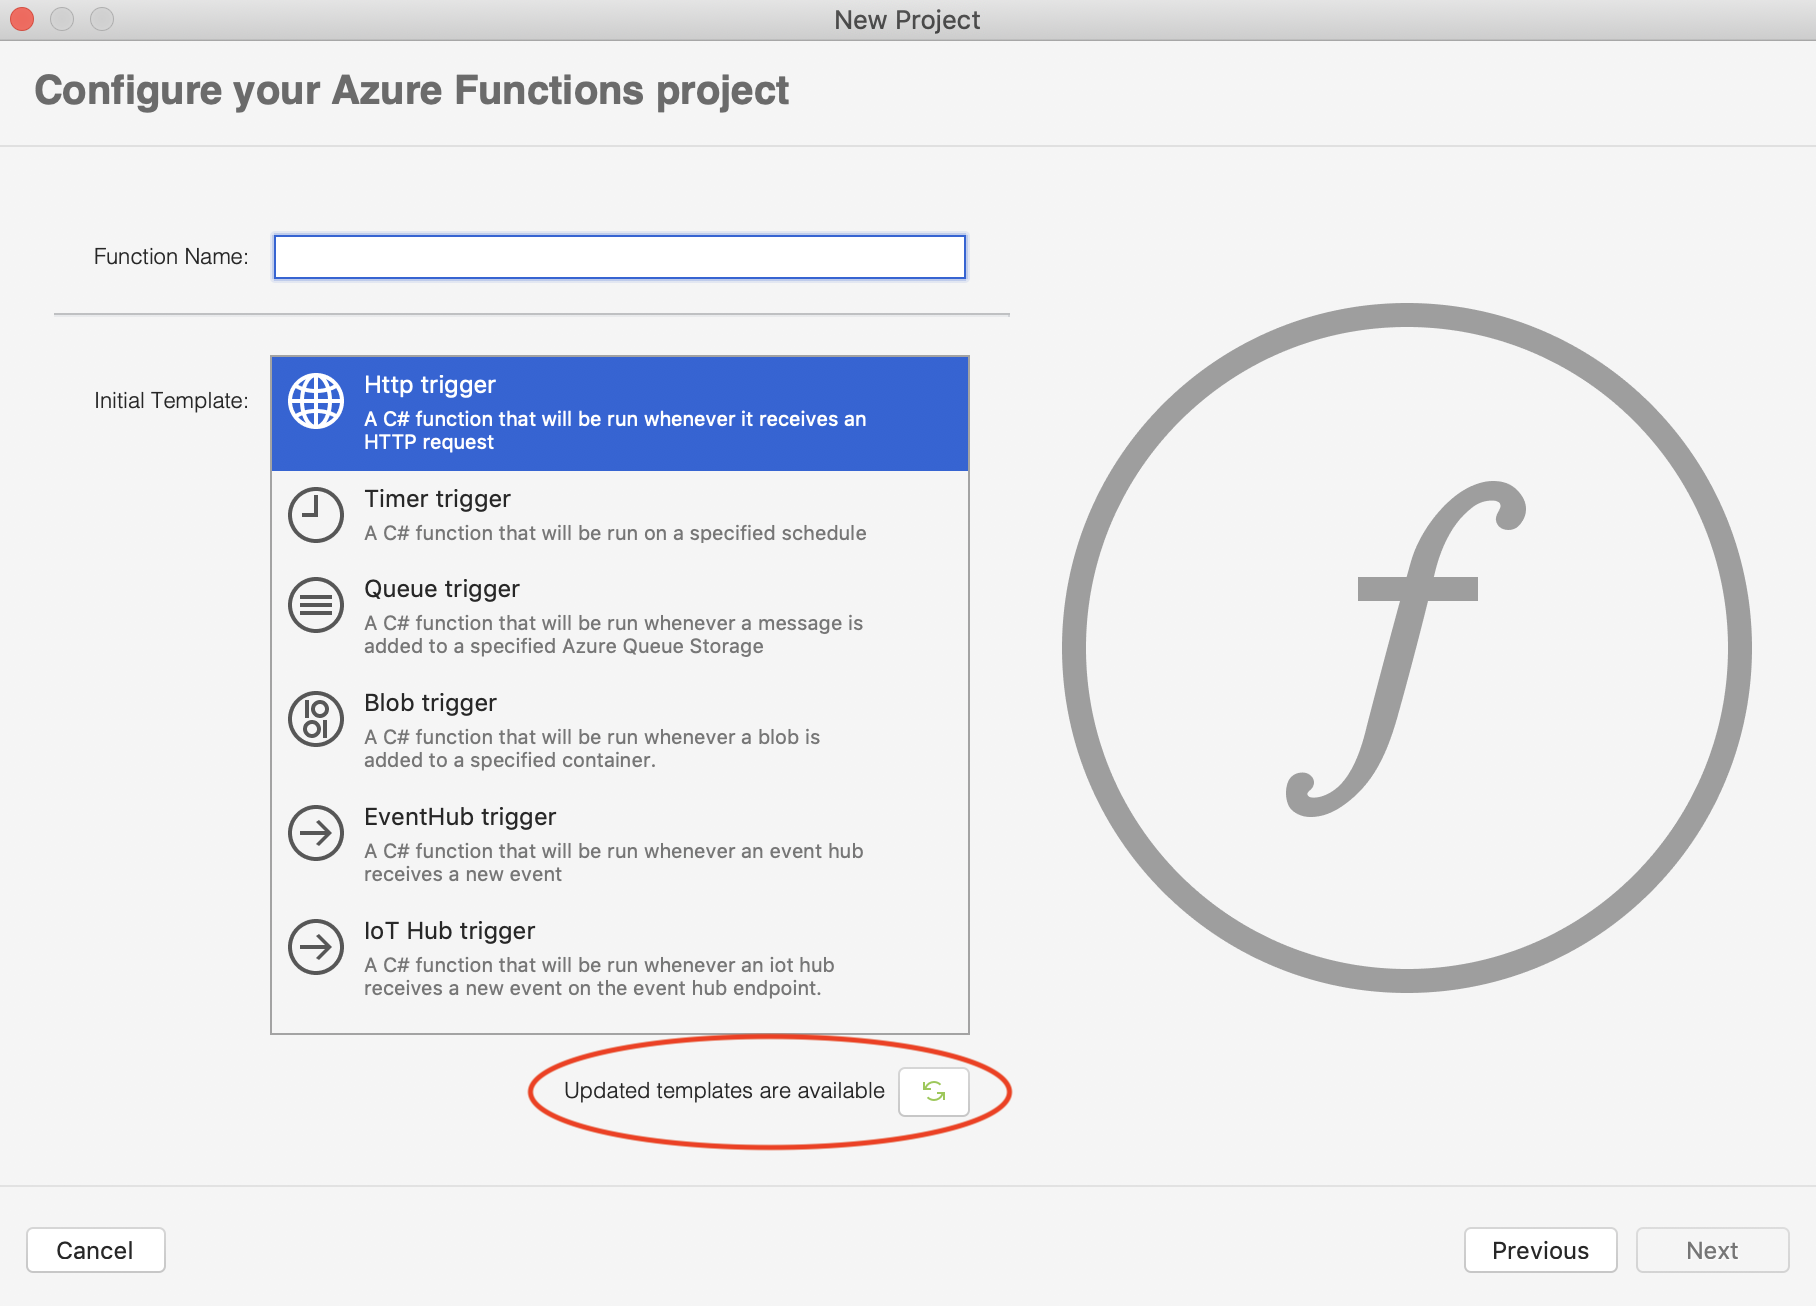 New project dialog showing Azure Functions updates are available